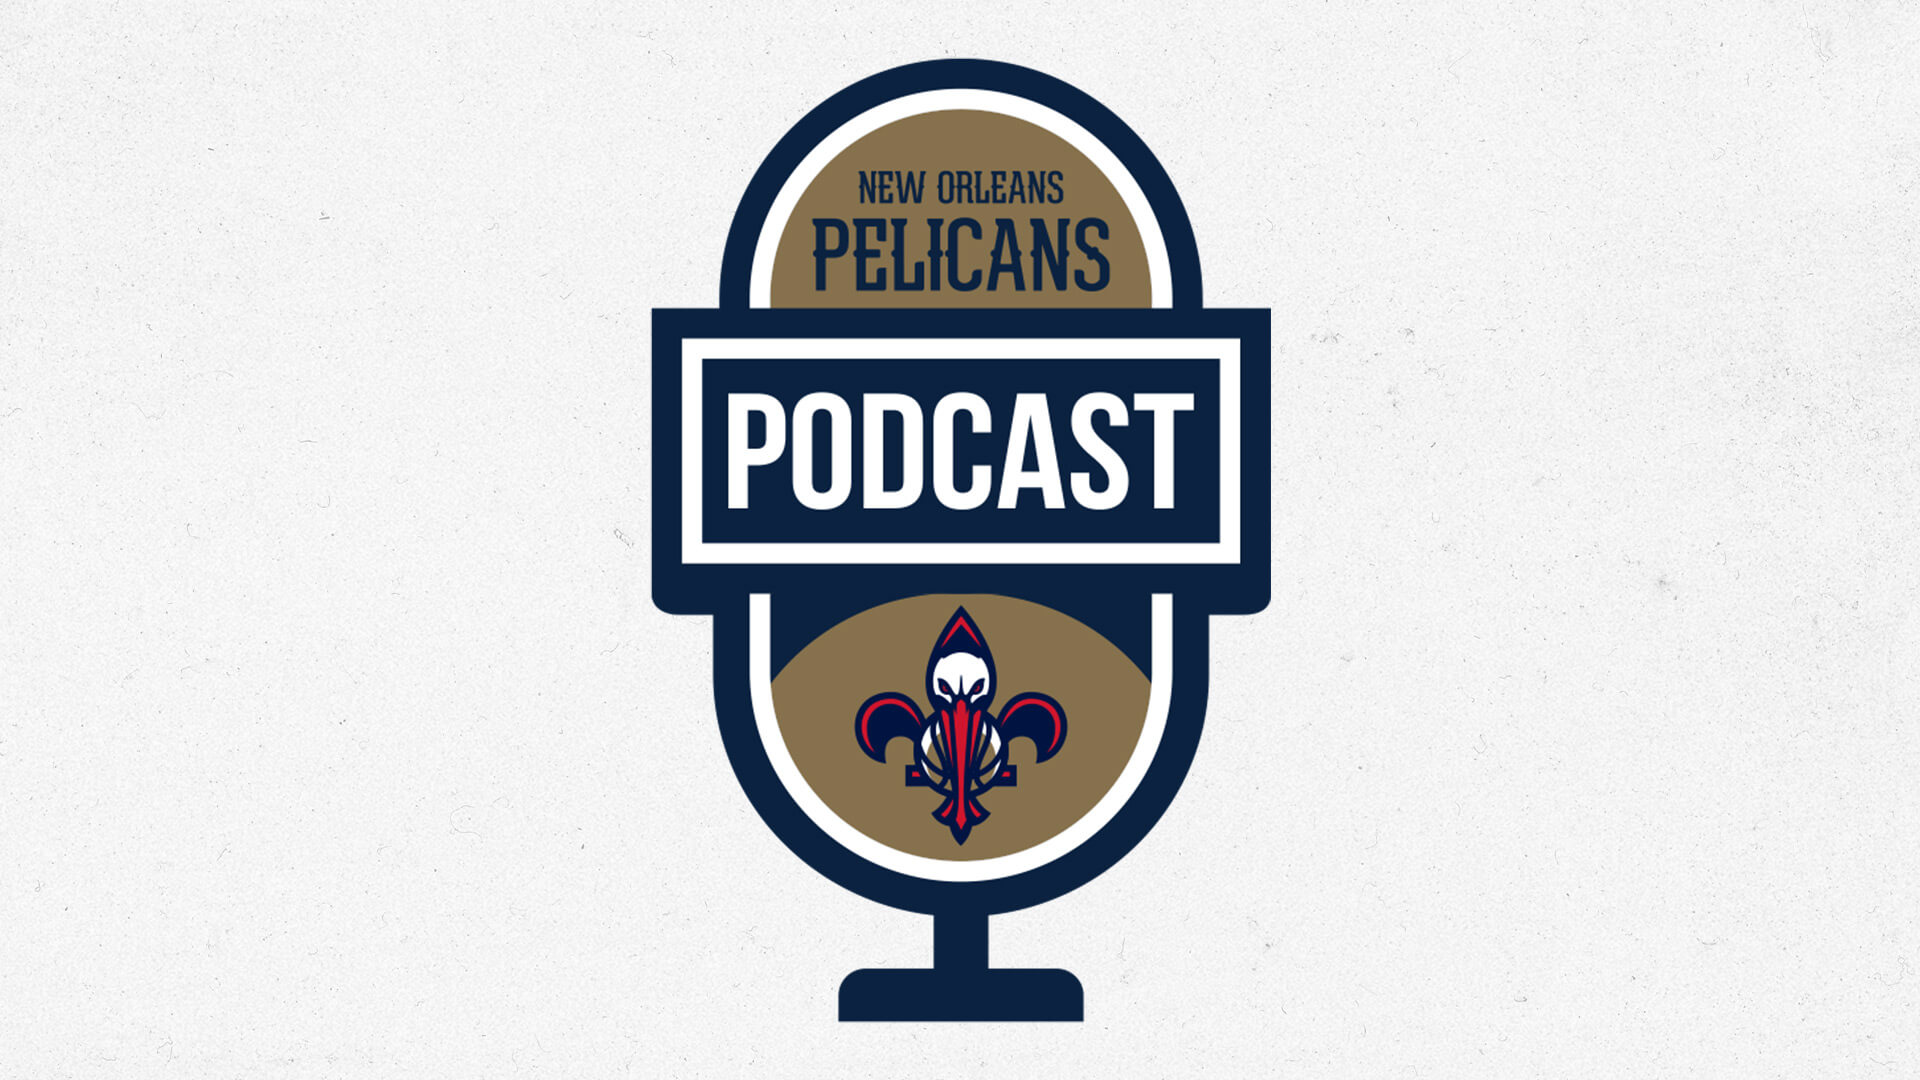 Eric Hasseltine on the New Orleans Pelicans podcast presented by SeatGeek - May 10, 2021